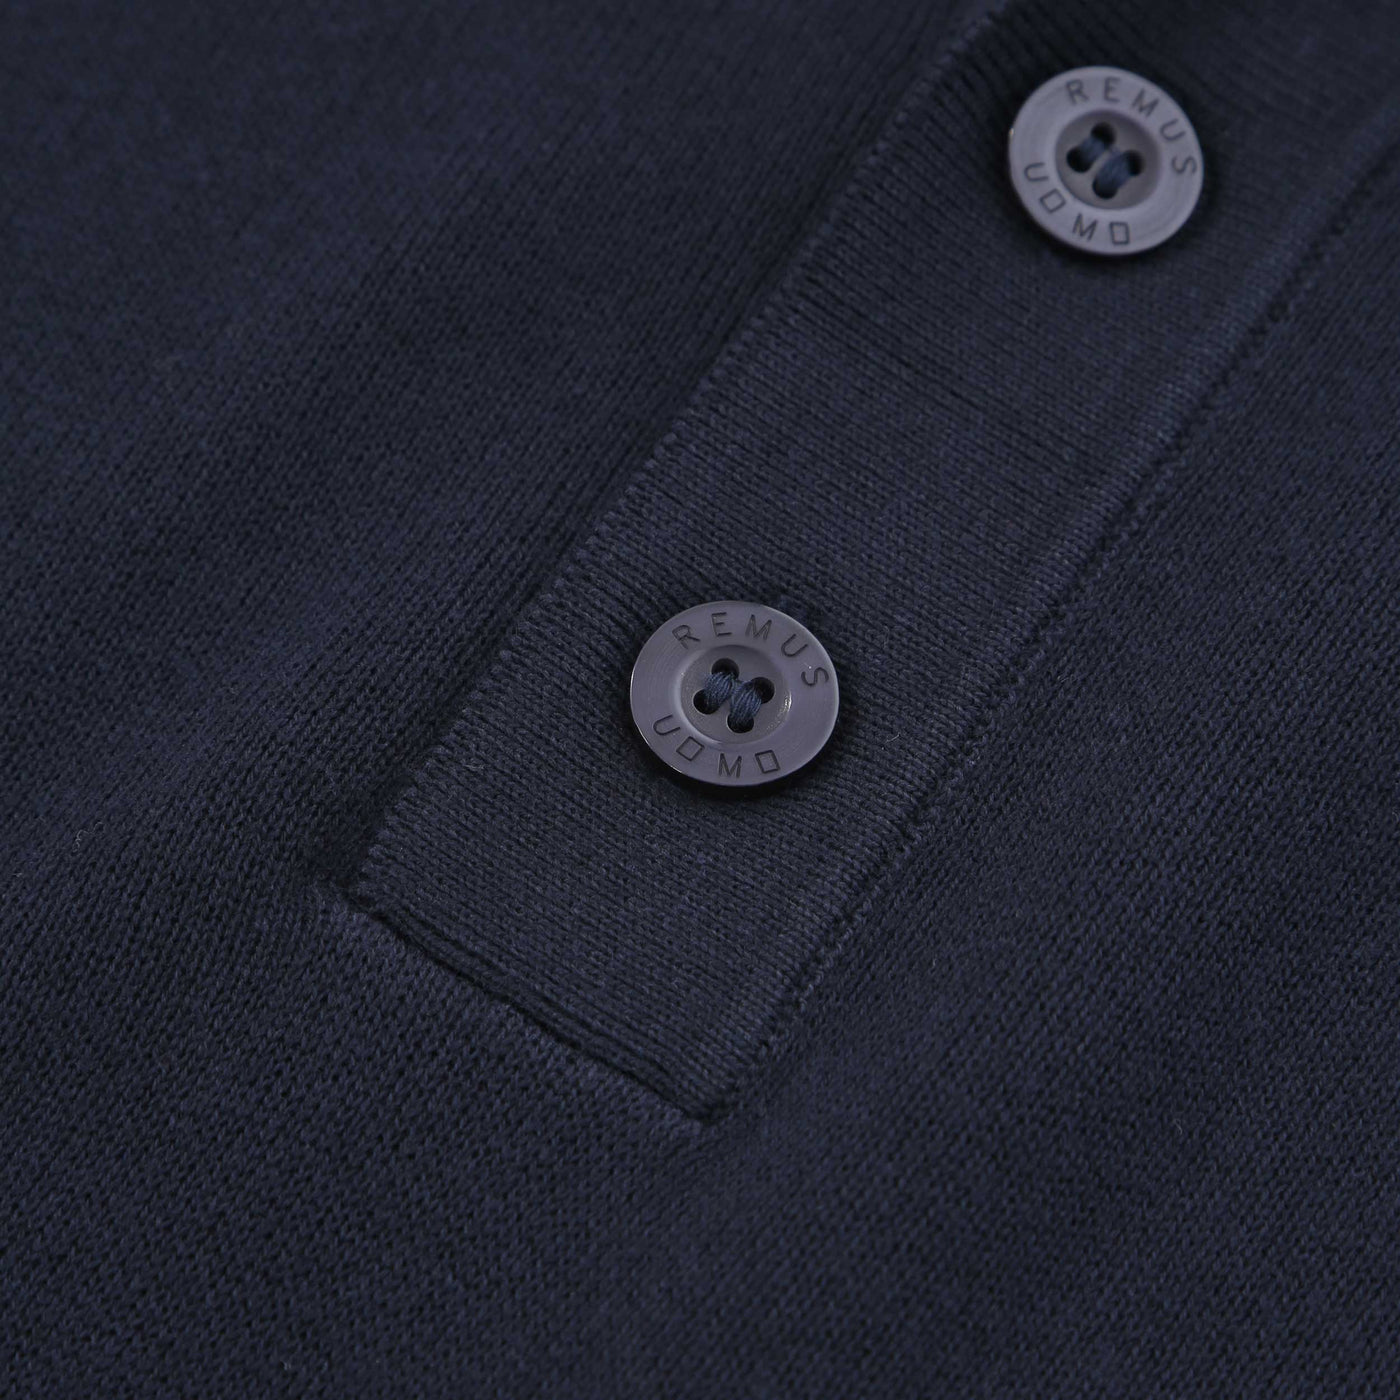 Remus Uomo Chunky 3 Button Knitted Polo Knitwear in Navy Placket